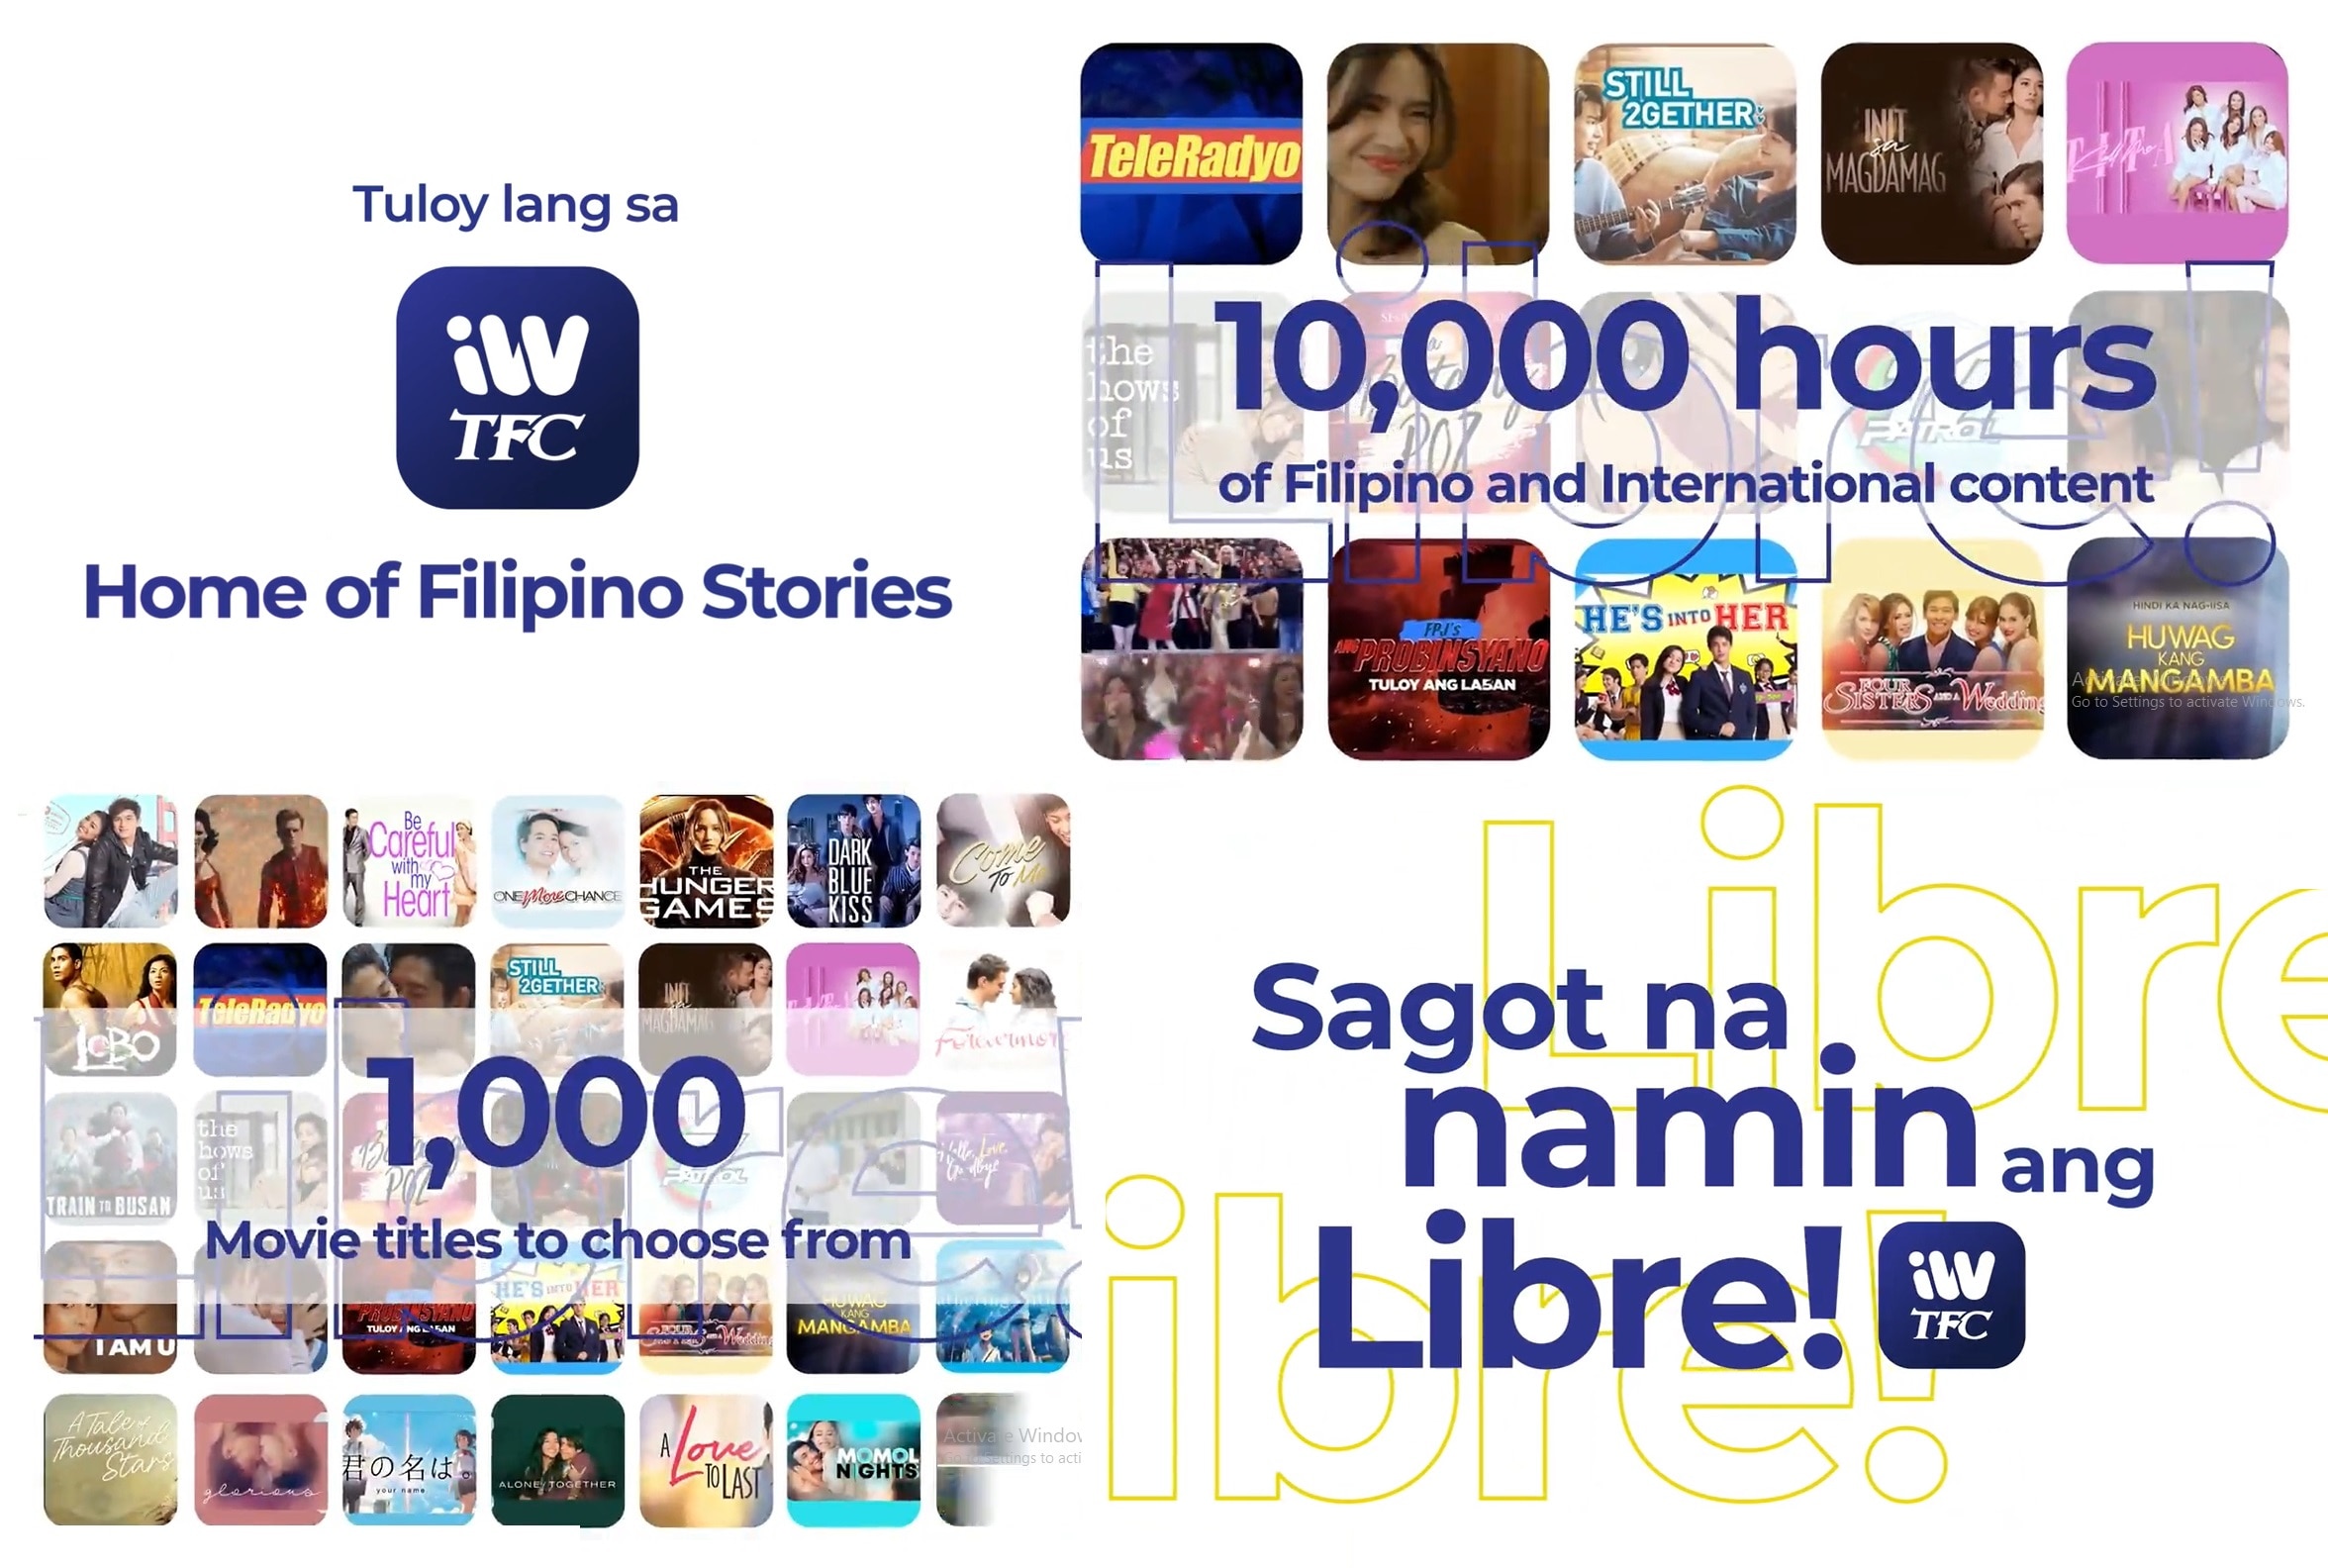 iWantTFC now offers free access to advance teleserye episodes, originals, and over 1,000 movies in PH